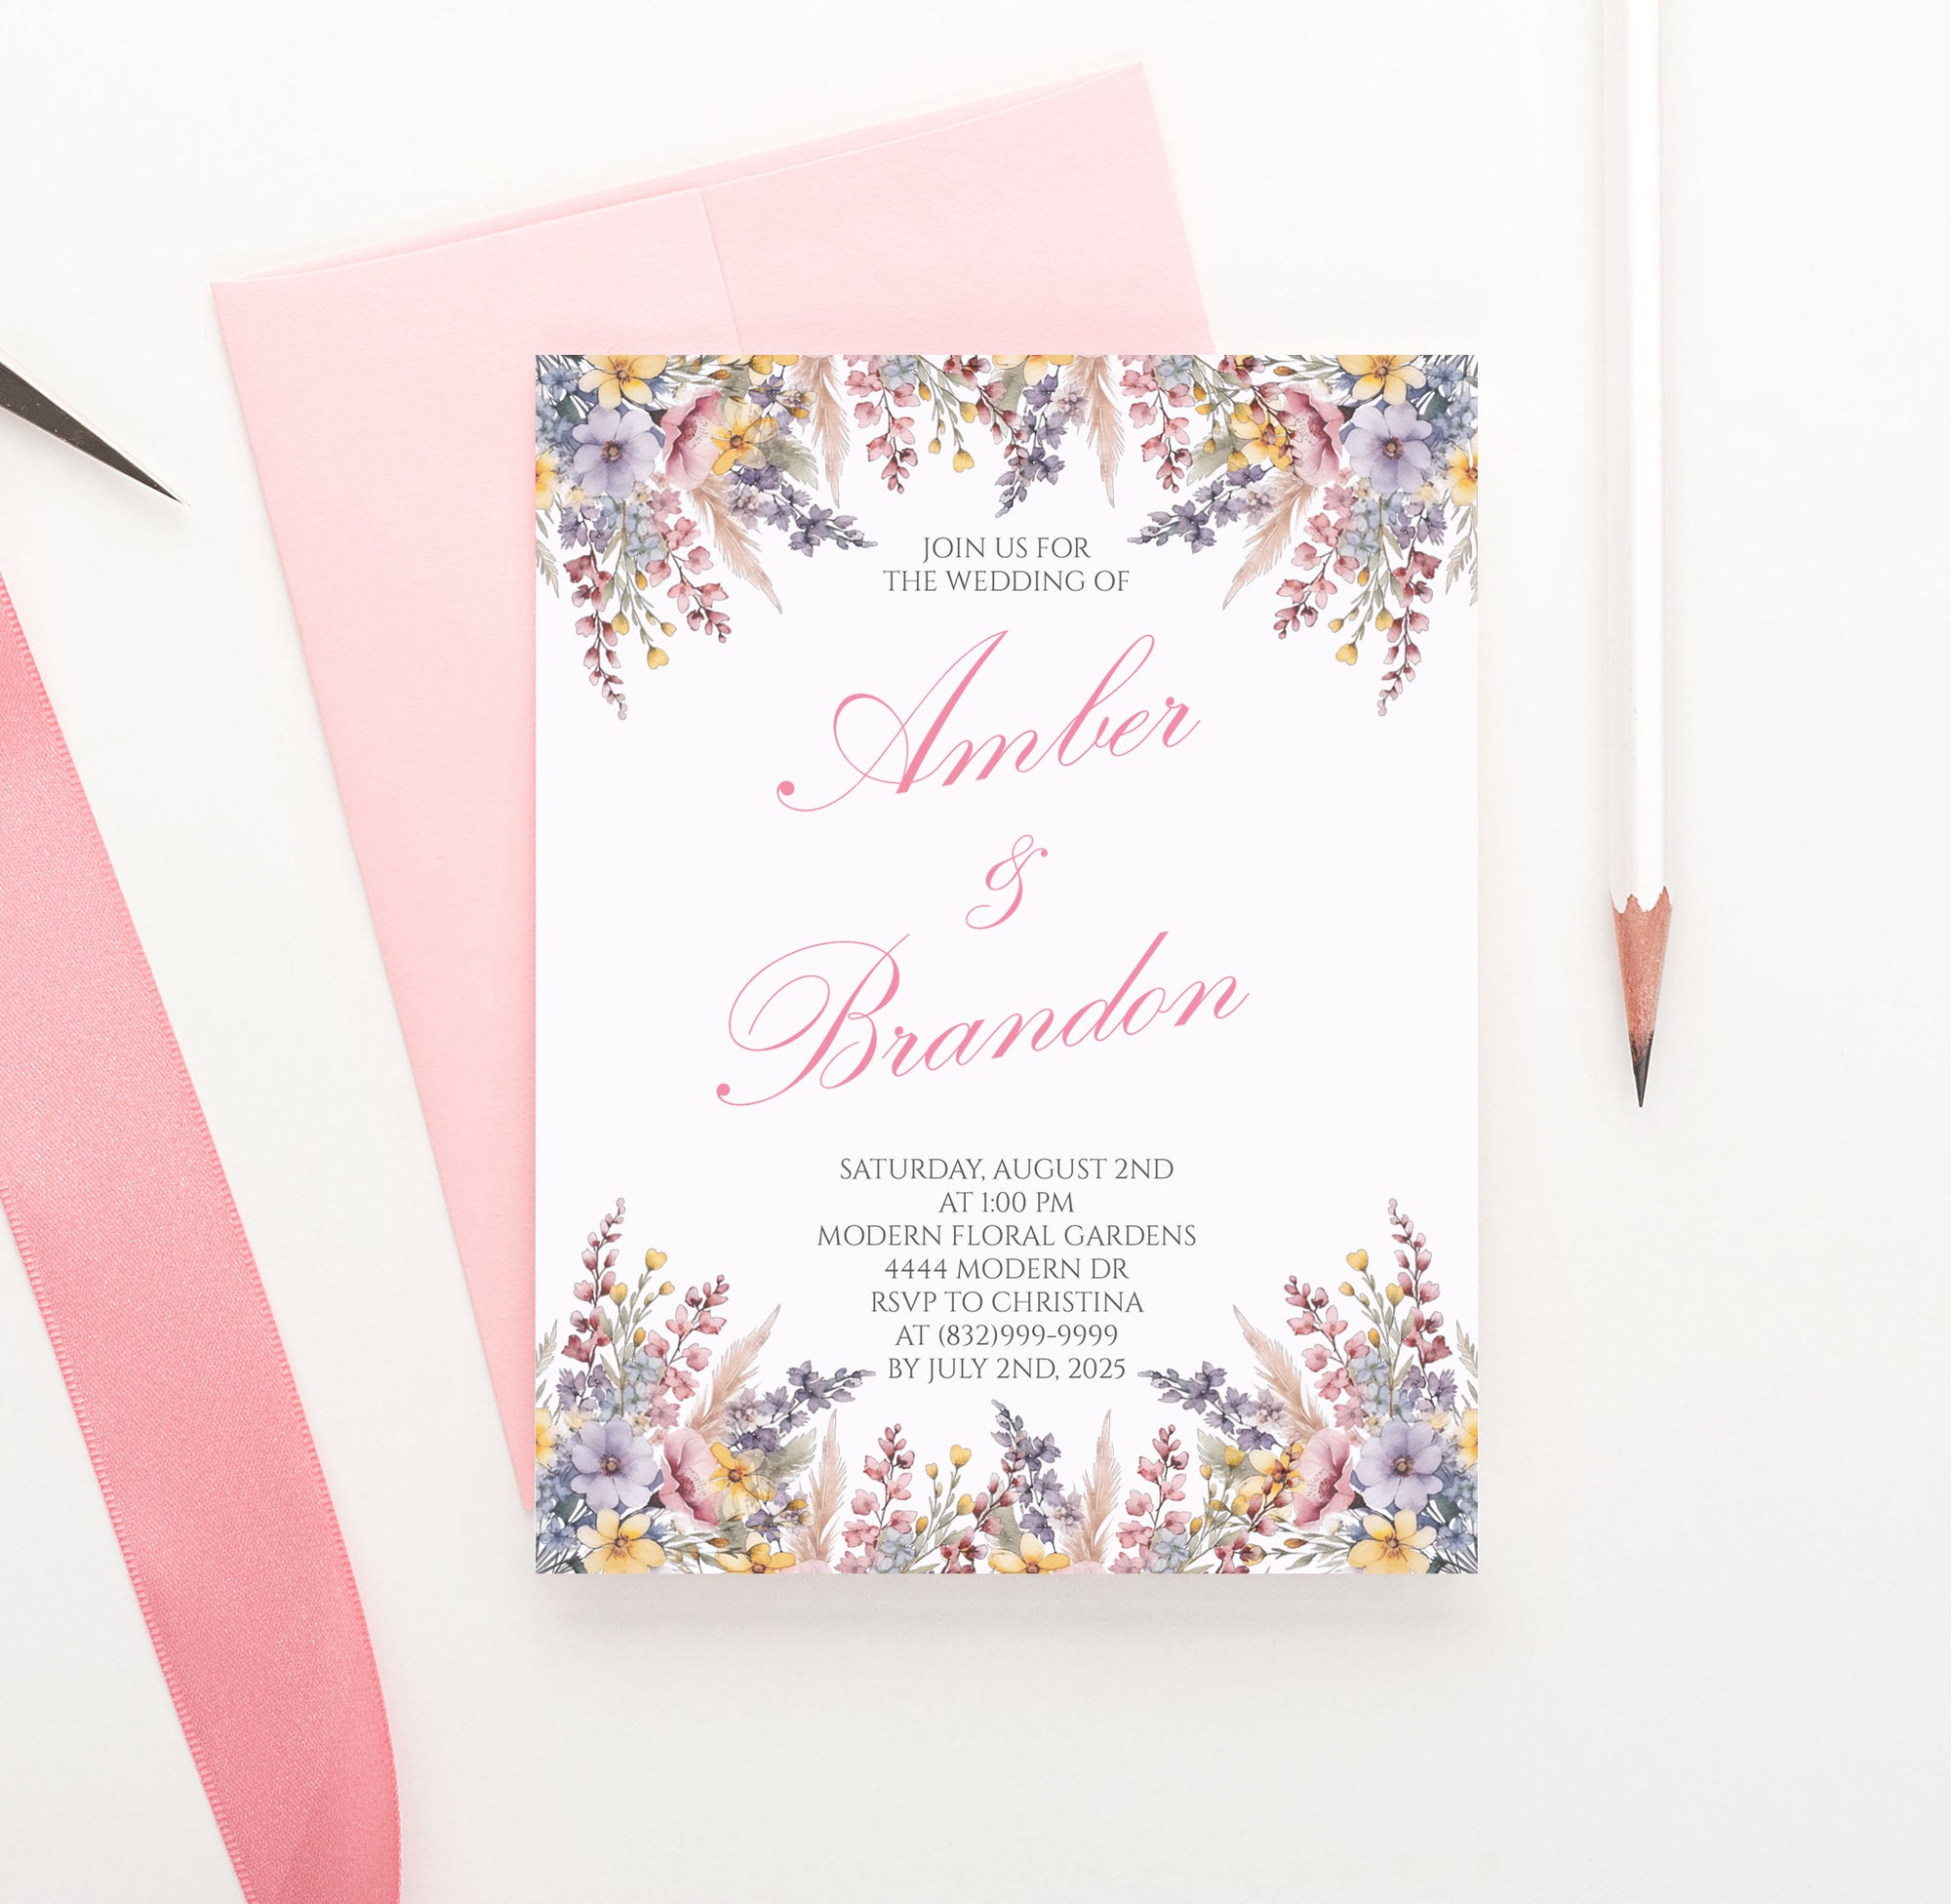 Classic Wedding Invitations with Wildflowers